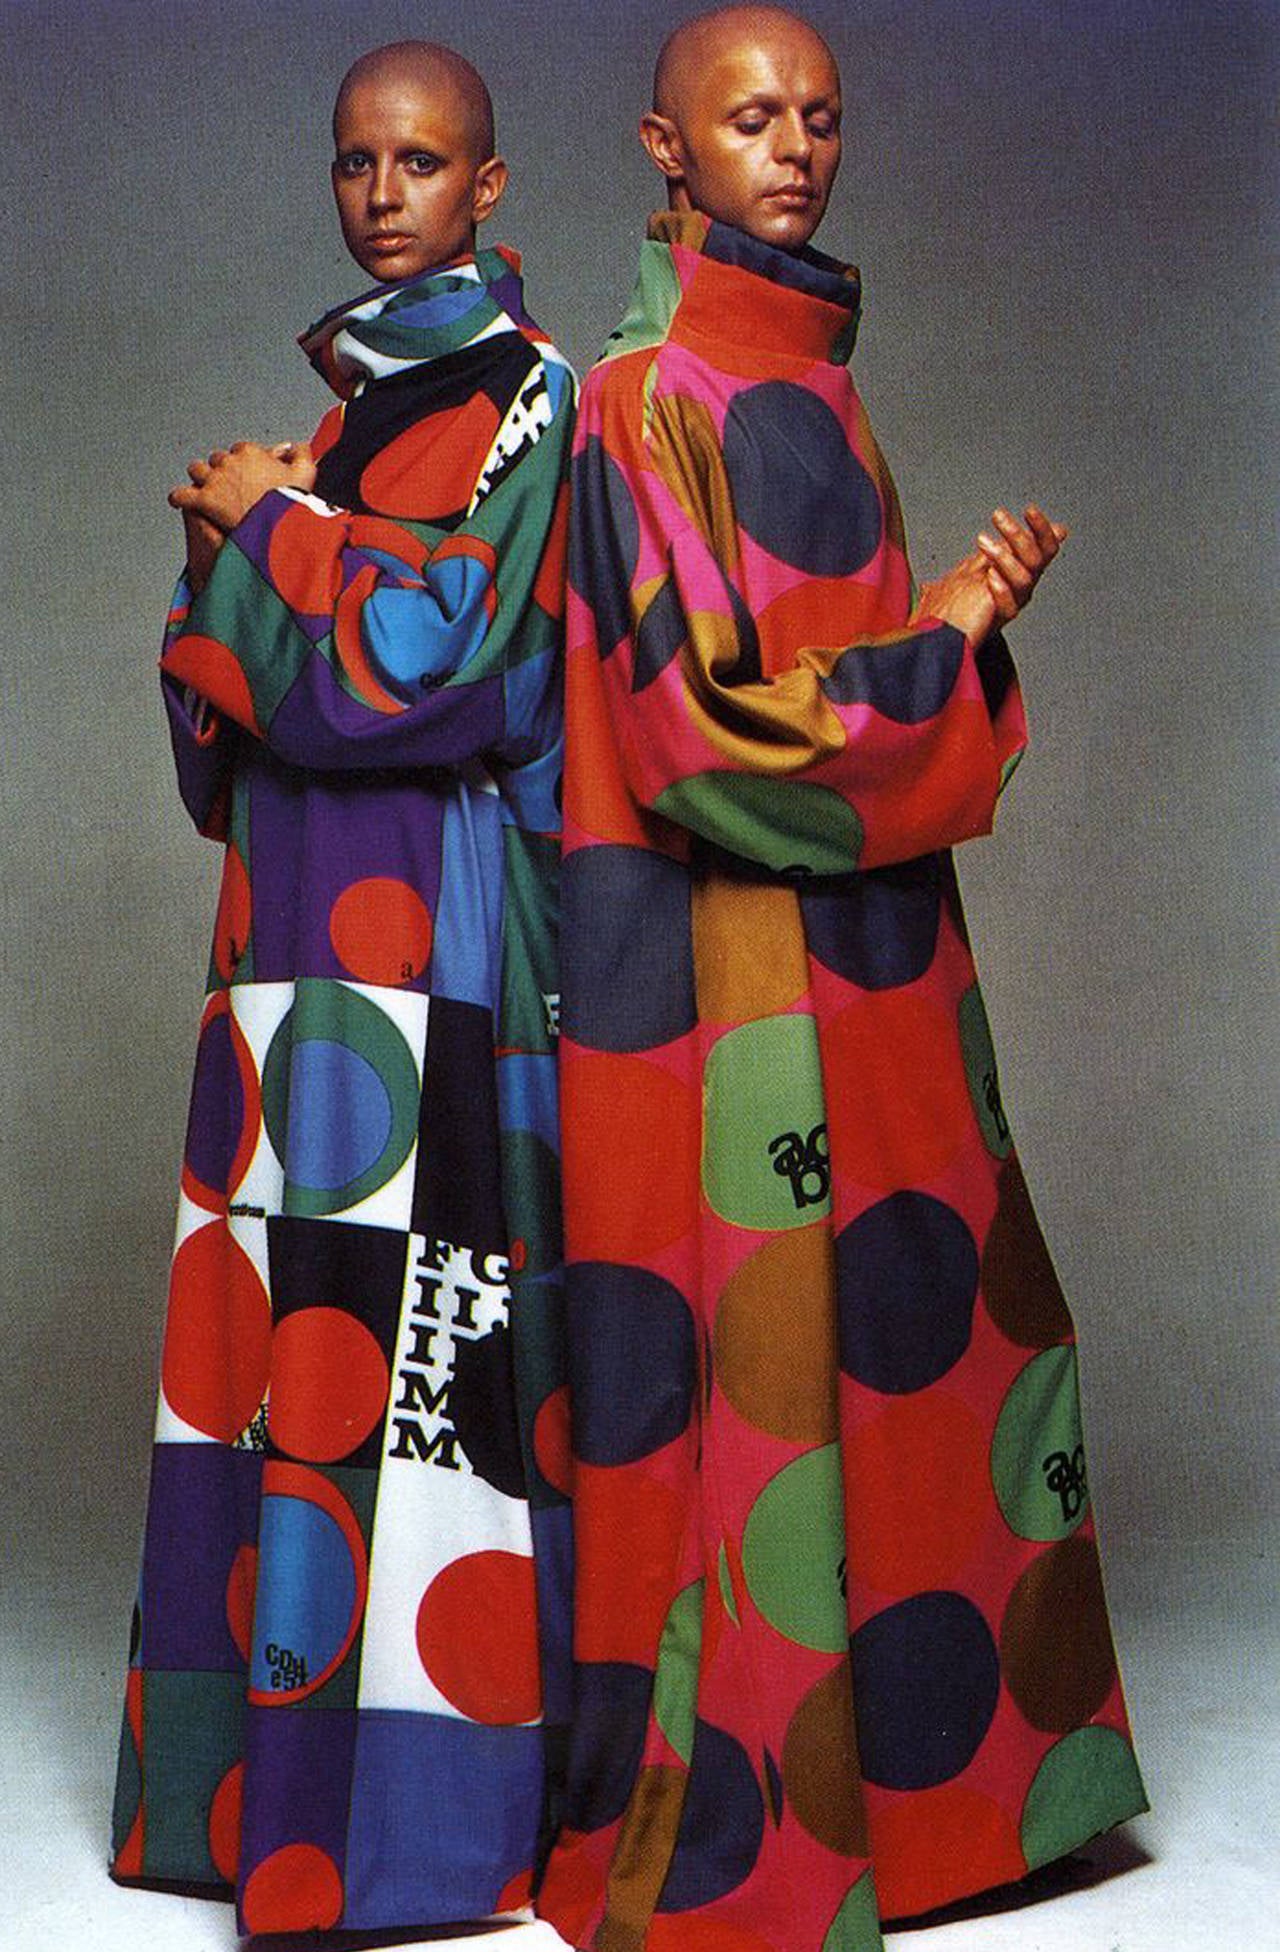 An exceptional museum quality Rudi Gernreich unisex knitted caftan designed in the year 1970. The caftan has a high standing tube collar, large polka-dot pattern and wide cut sleeves. 

Rudi Gernreich had a great interest in unisex clothing and